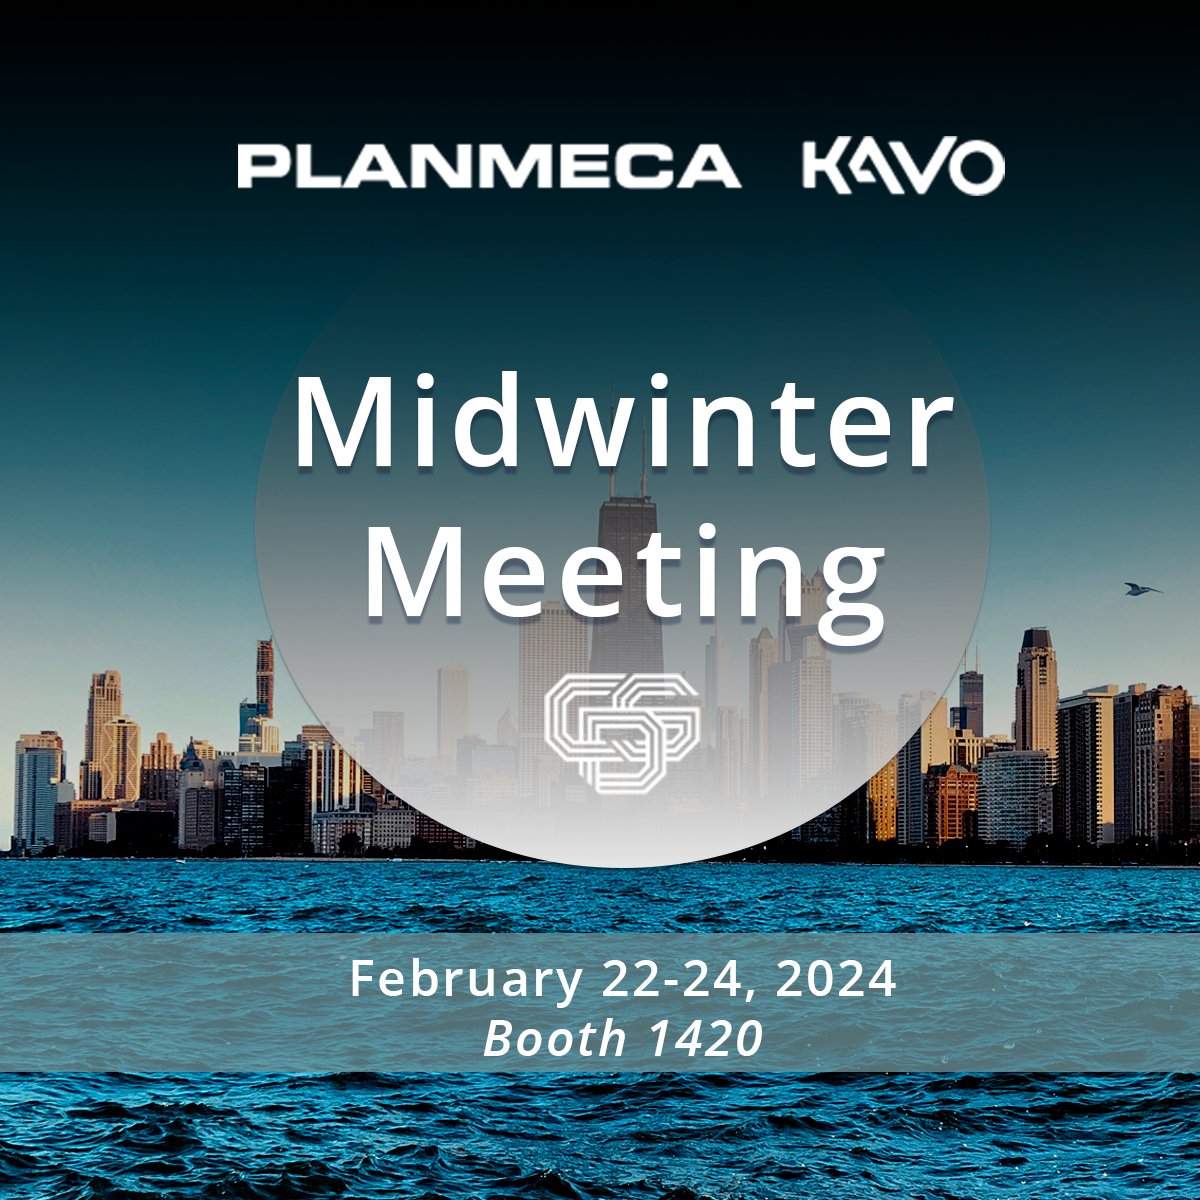 When the next big thing in dentistry comes along, you want to be there. Come to the Midwinter Meeting and see the tested and validated products and processes that make Planmeca and KaVo  trustworthy sources of innovation. #CMW2024